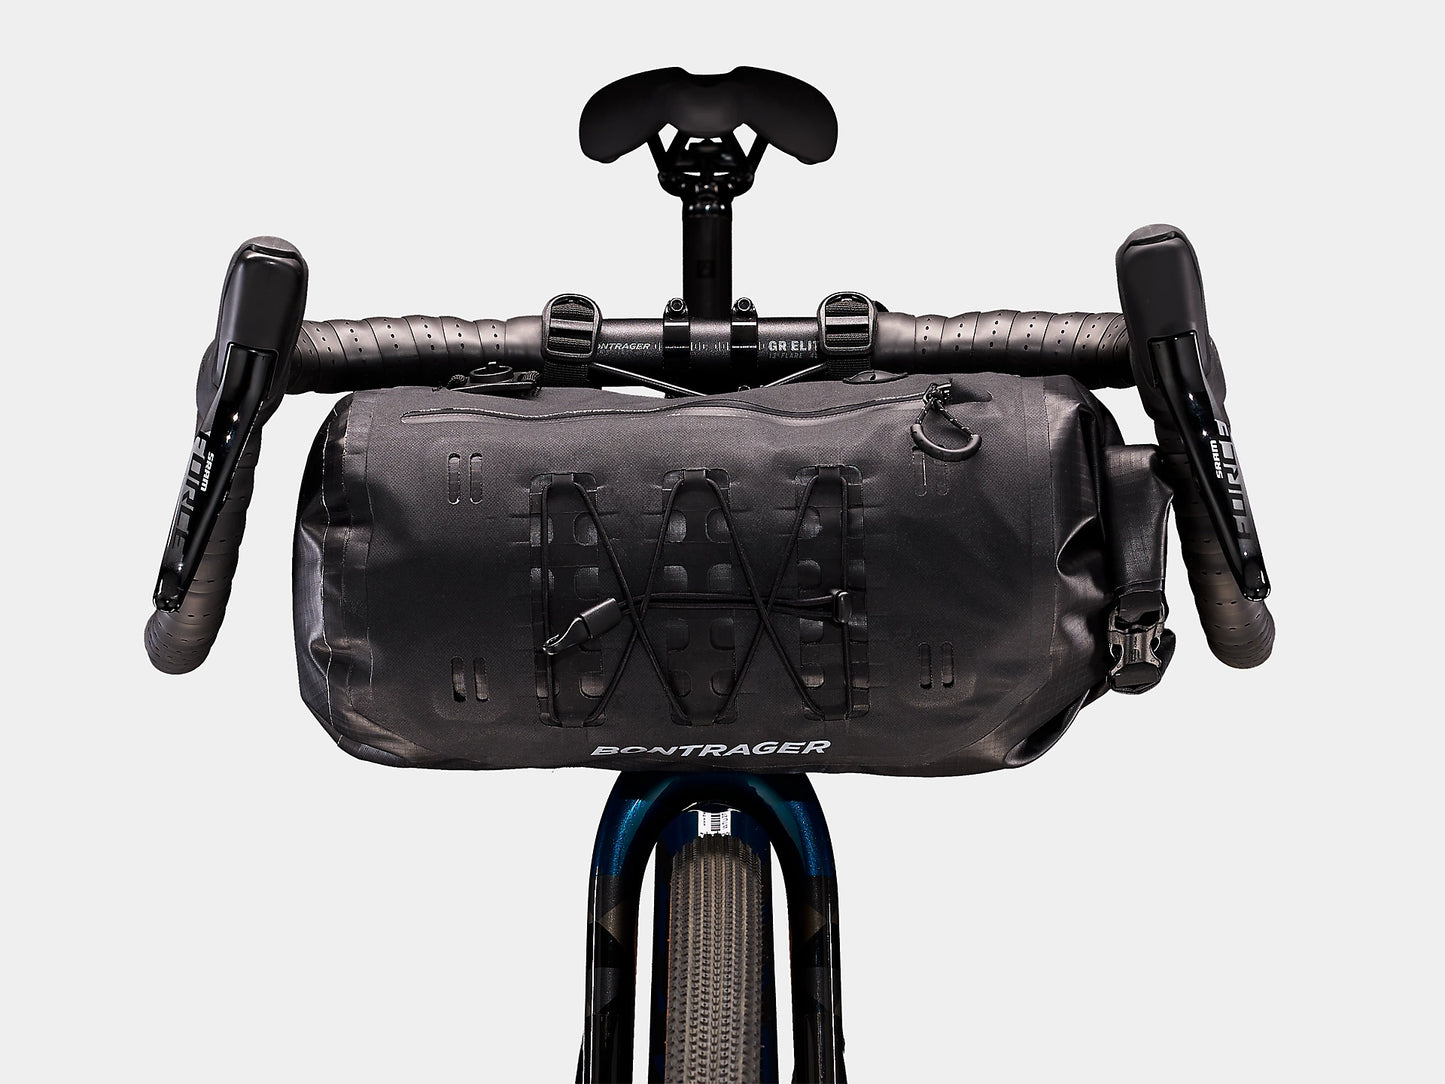 Bontrager Adventure Handlebar Bag 9L on the front of a bikes handlebars with a white background